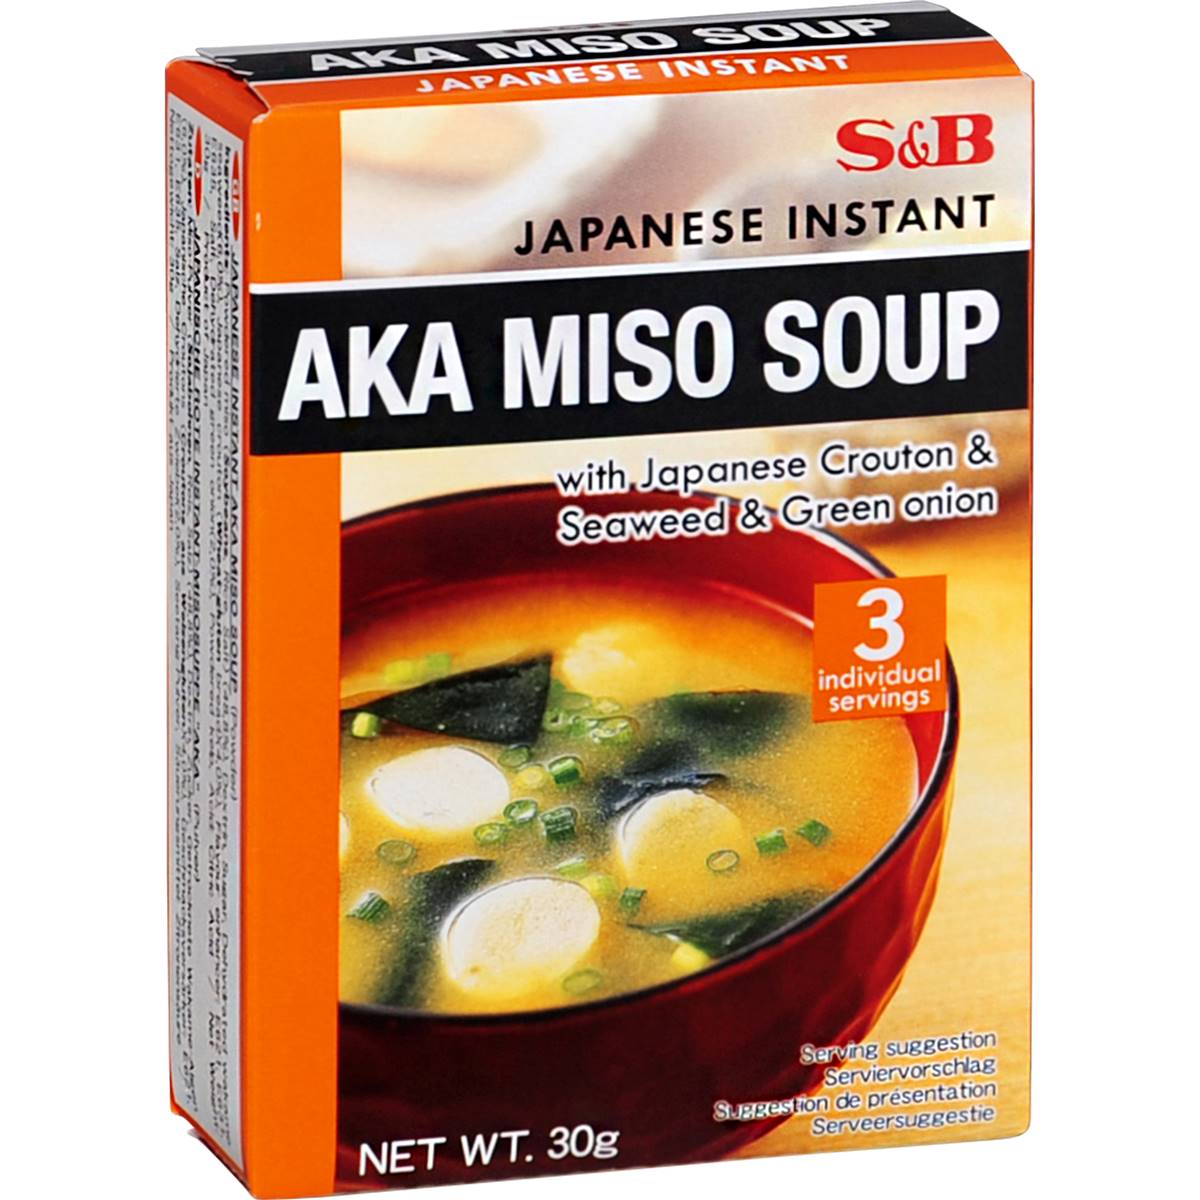 Calories in S&b Miso Soup Aka